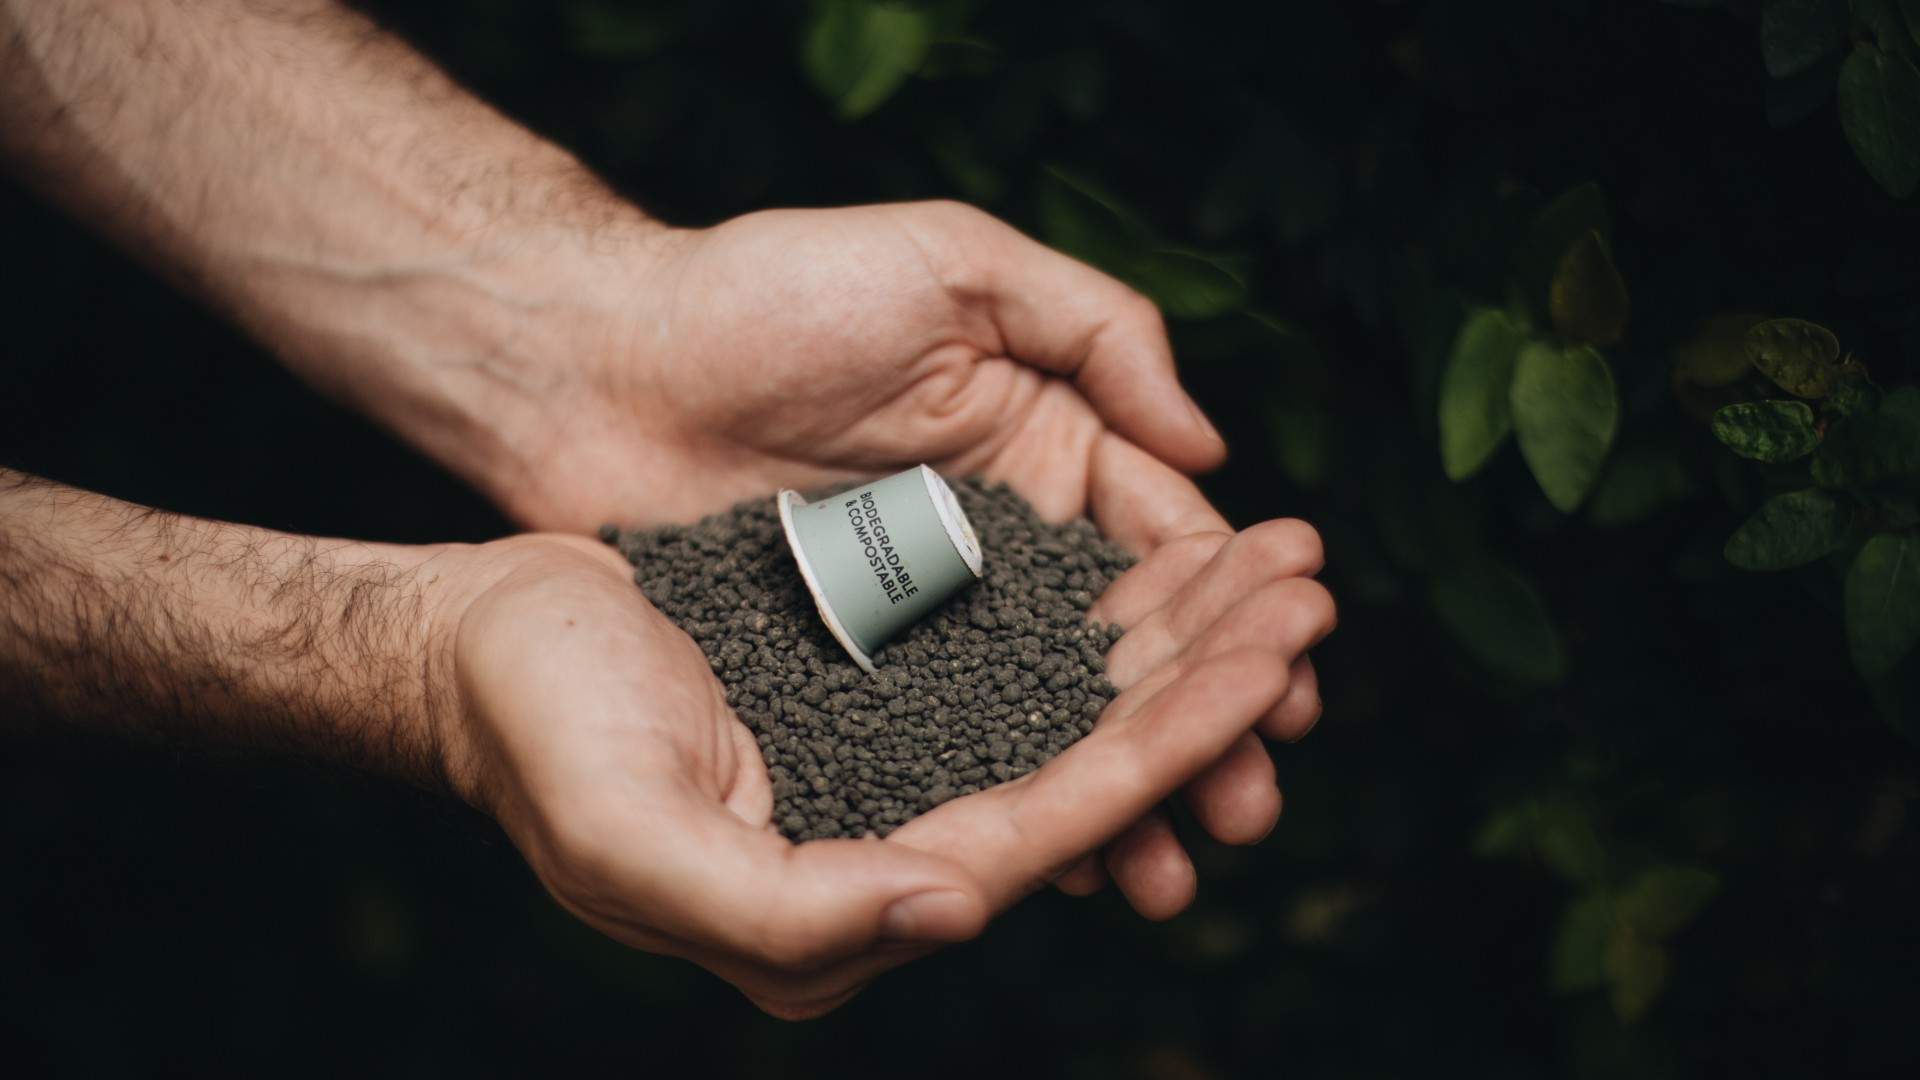 Tripod Coffee's Dirt Club Collects Your Used Coffee Pods and Turns Them Into Compost